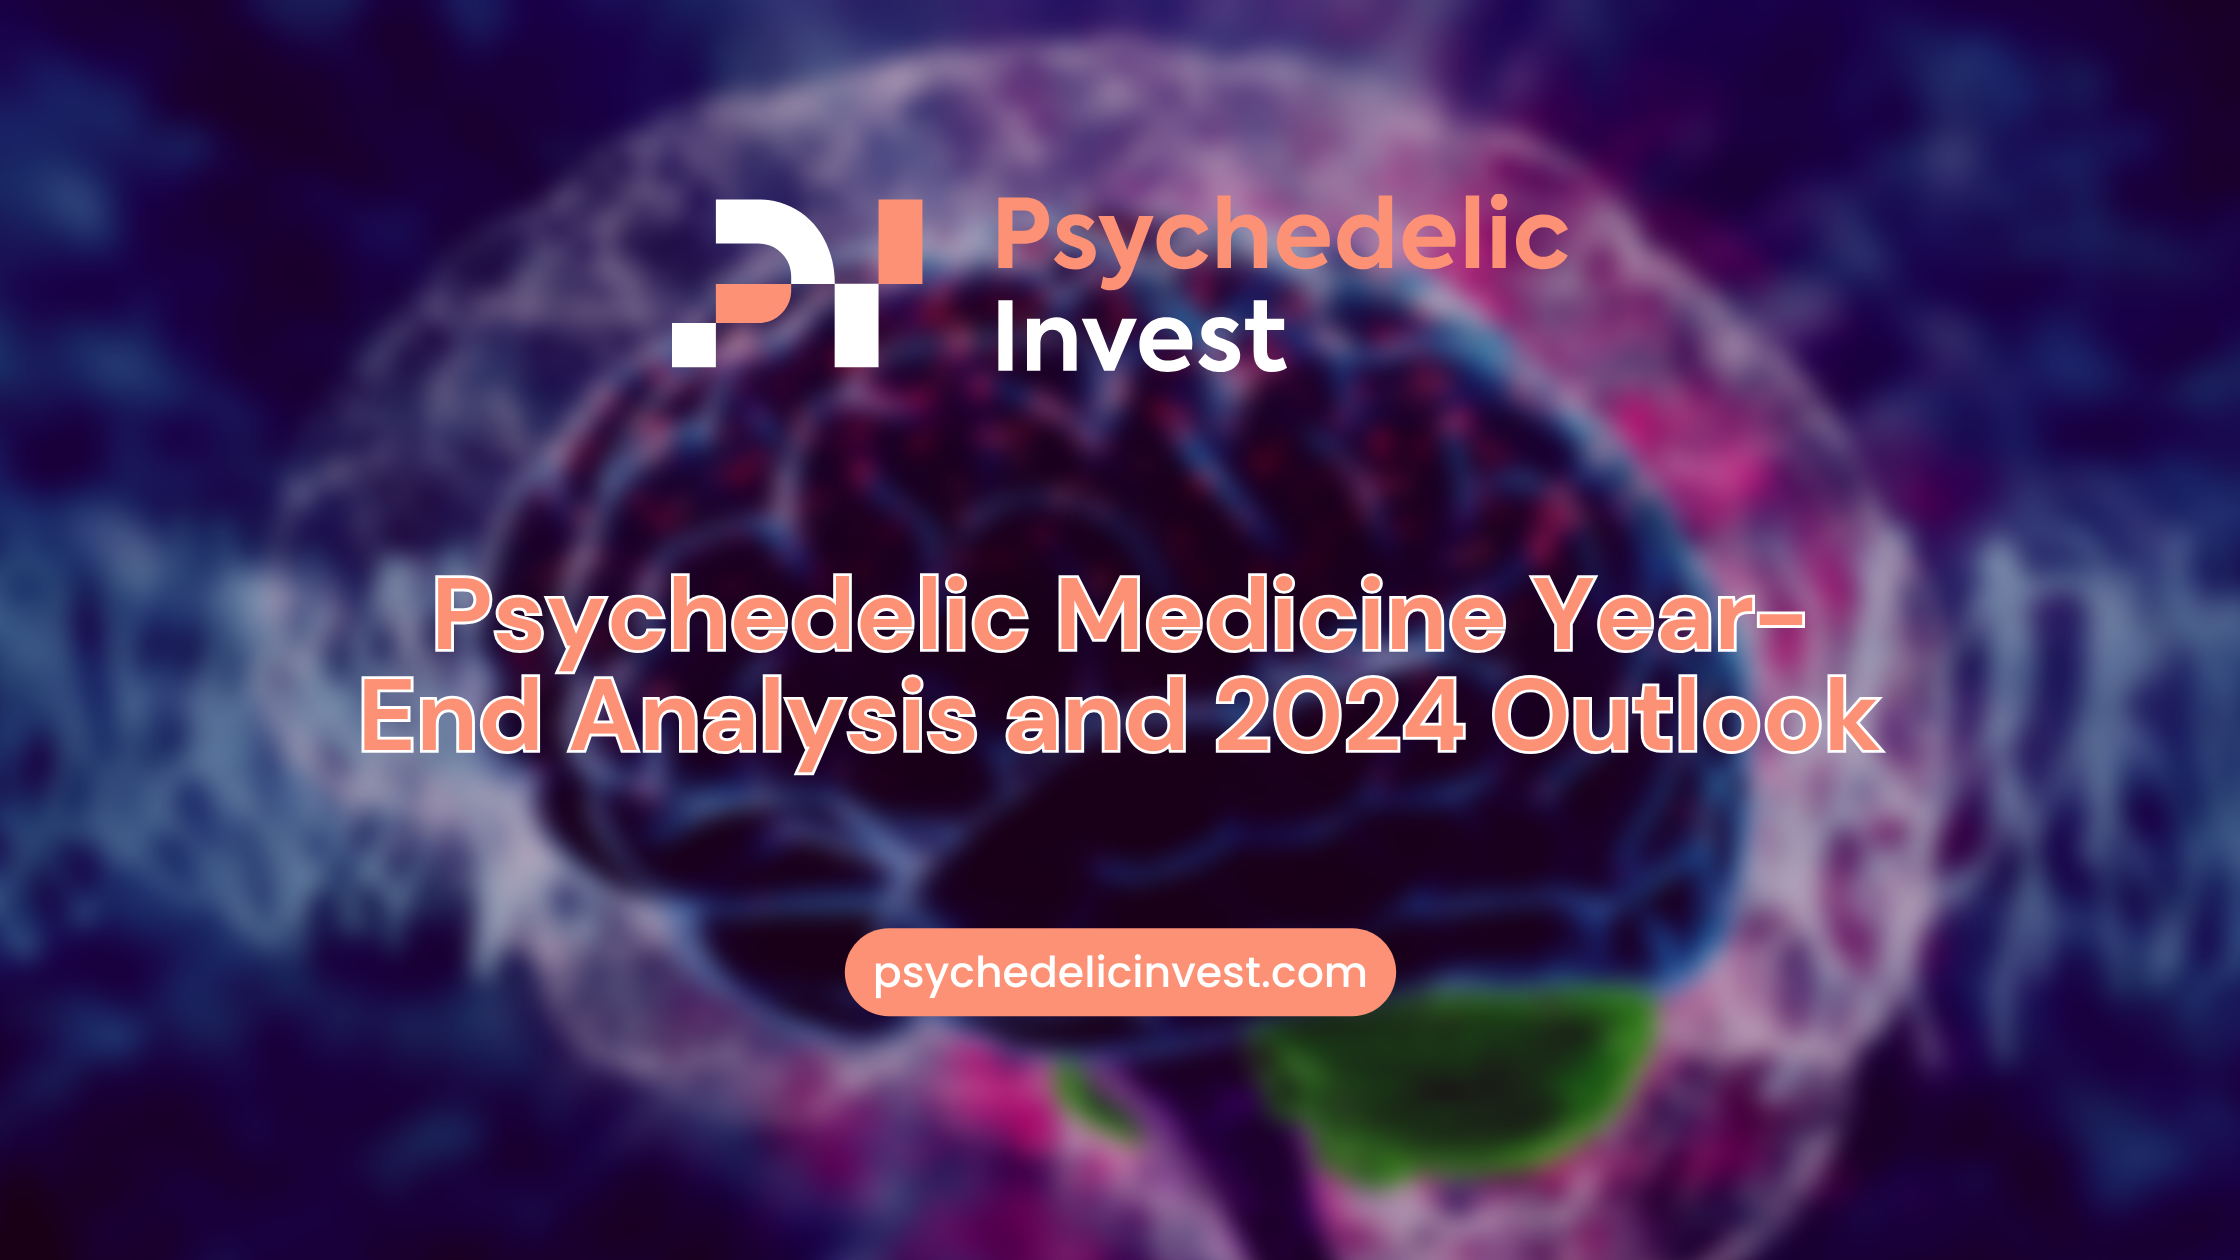 Psychedelic Medicine Year End Analysis (PRO REPORT)